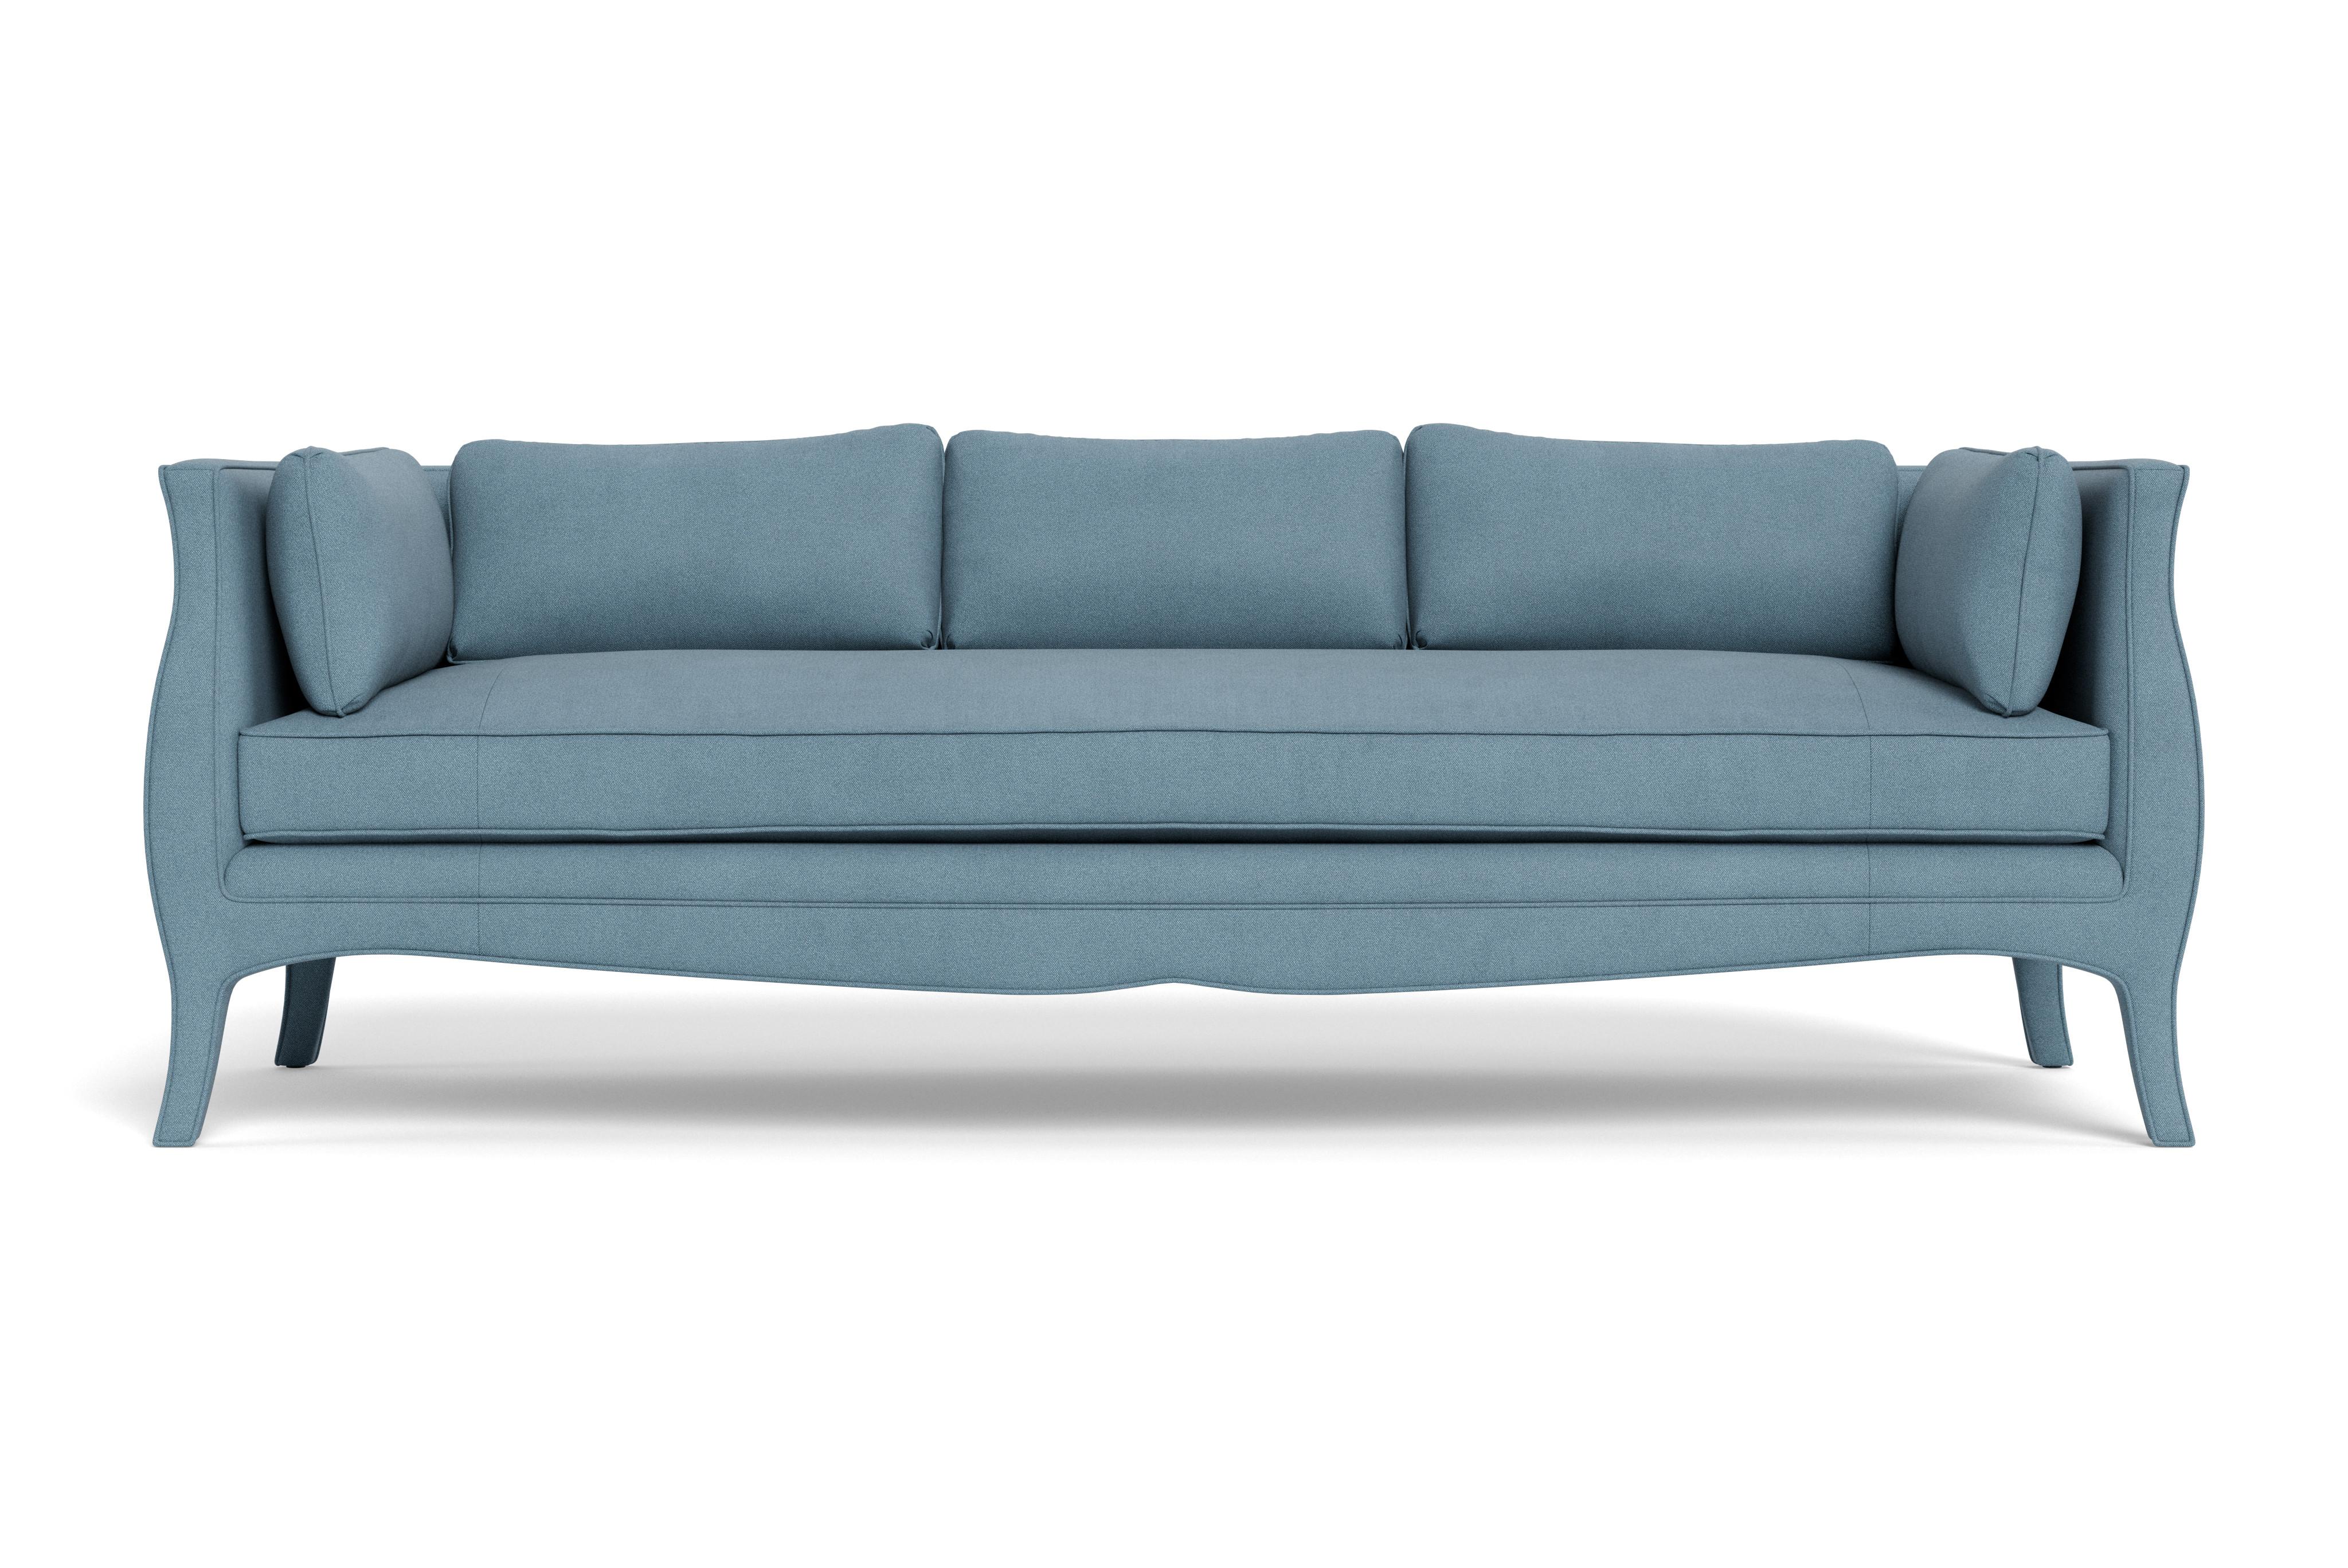 This piece, with its pretty lines and long, low form, is so tempting to sink into and when you do you’ll appreciate the irresistible softness, deep plush seat and perfectly sized plump cushions that envelop you. Ideal entertaining an intimate crowd,